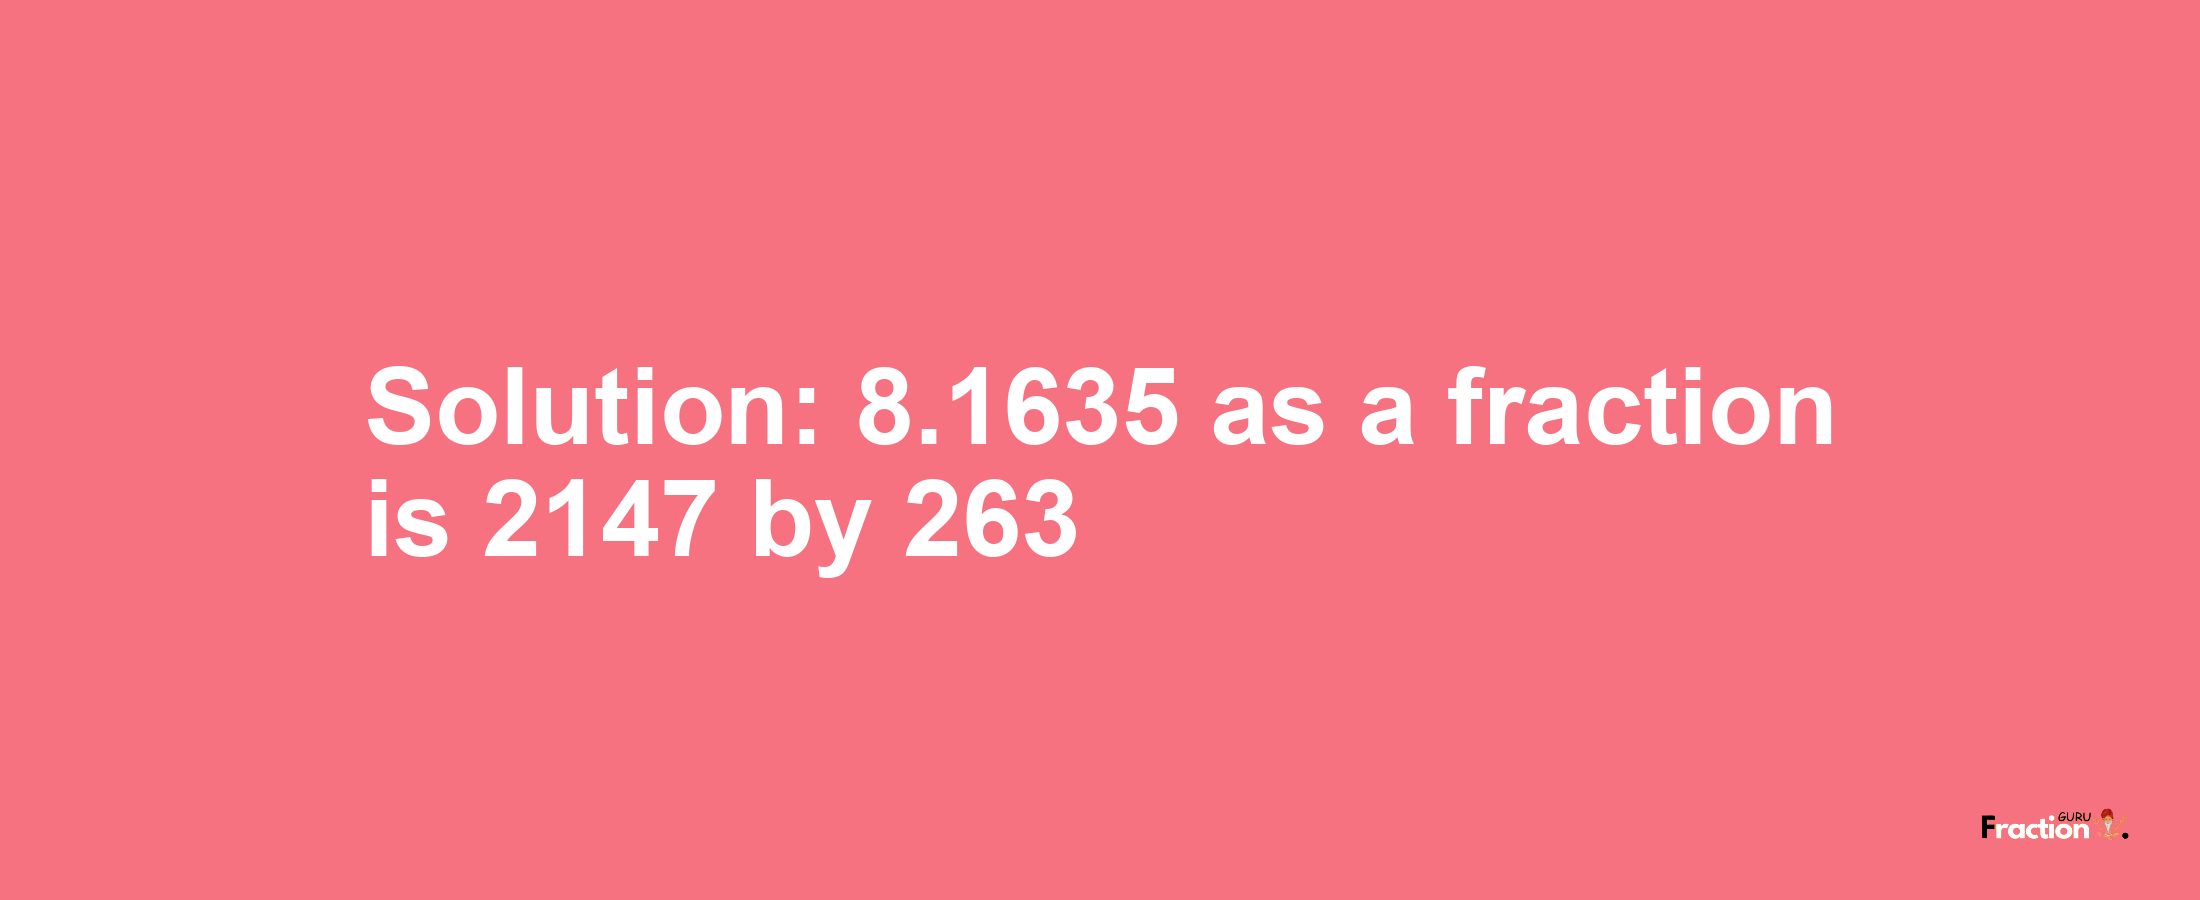 Solution:8.1635 as a fraction is 2147/263